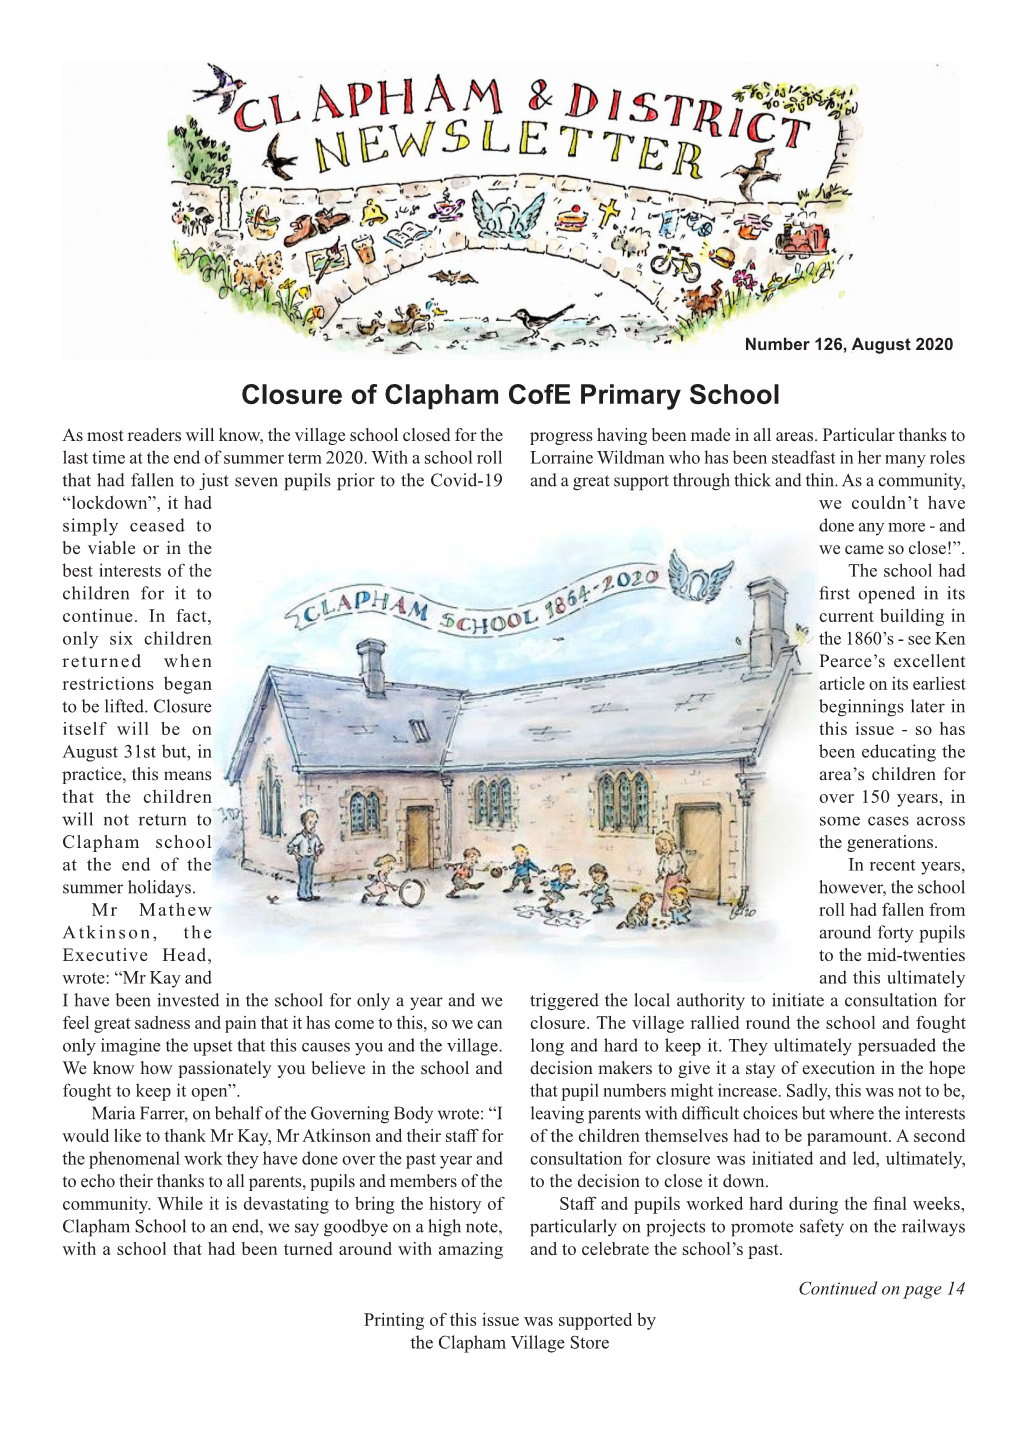 Closure of Clapham Cofe Primary School As Most Readers Will Know, the Village School Closed for the Progress Having Been Made in All Areas